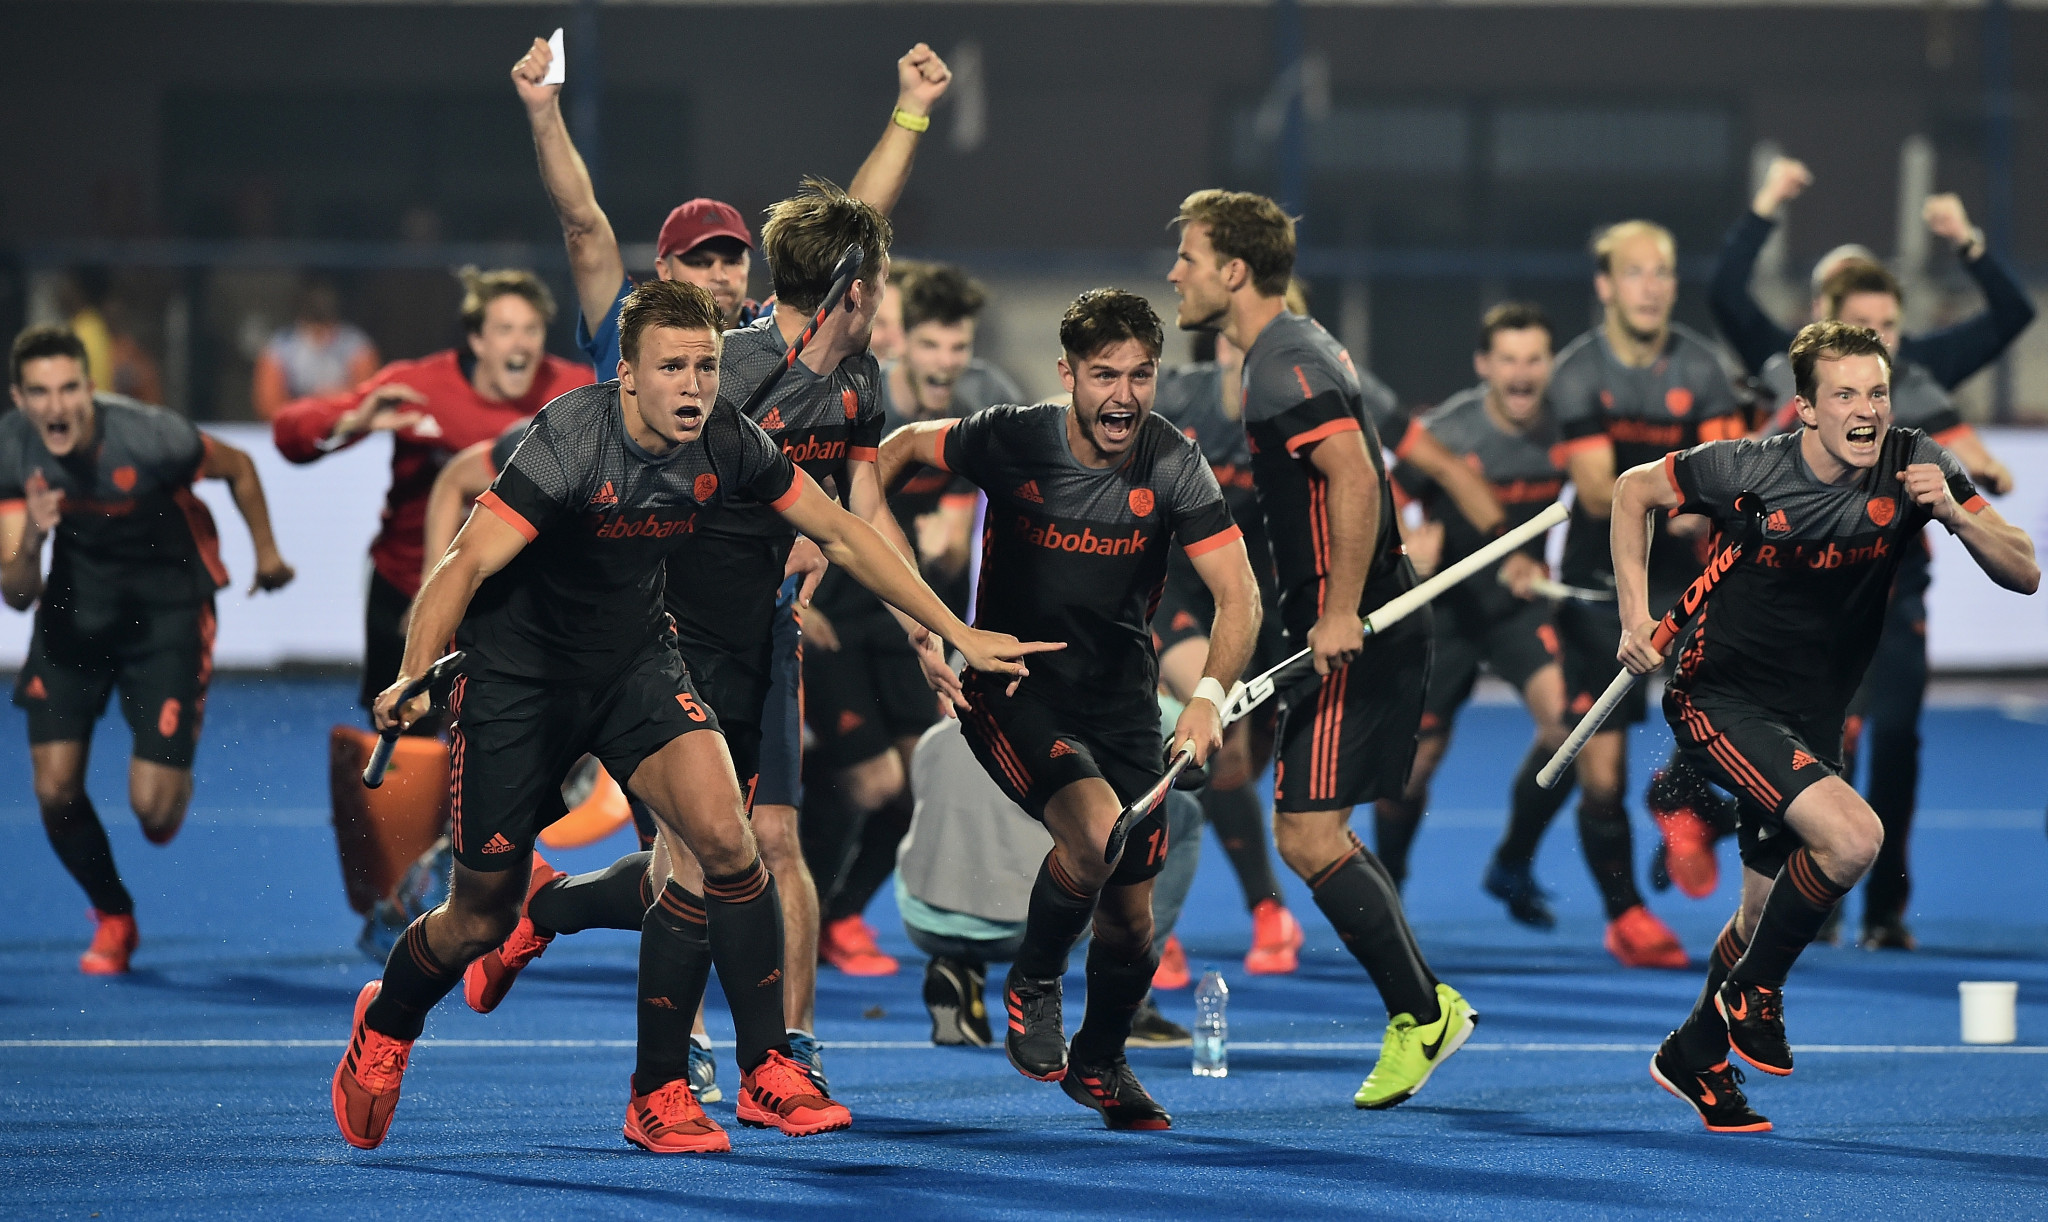 Belgium and The Netherlands to fight for gold at FIH Men's Hockey World Cup after contrasting last four clashes